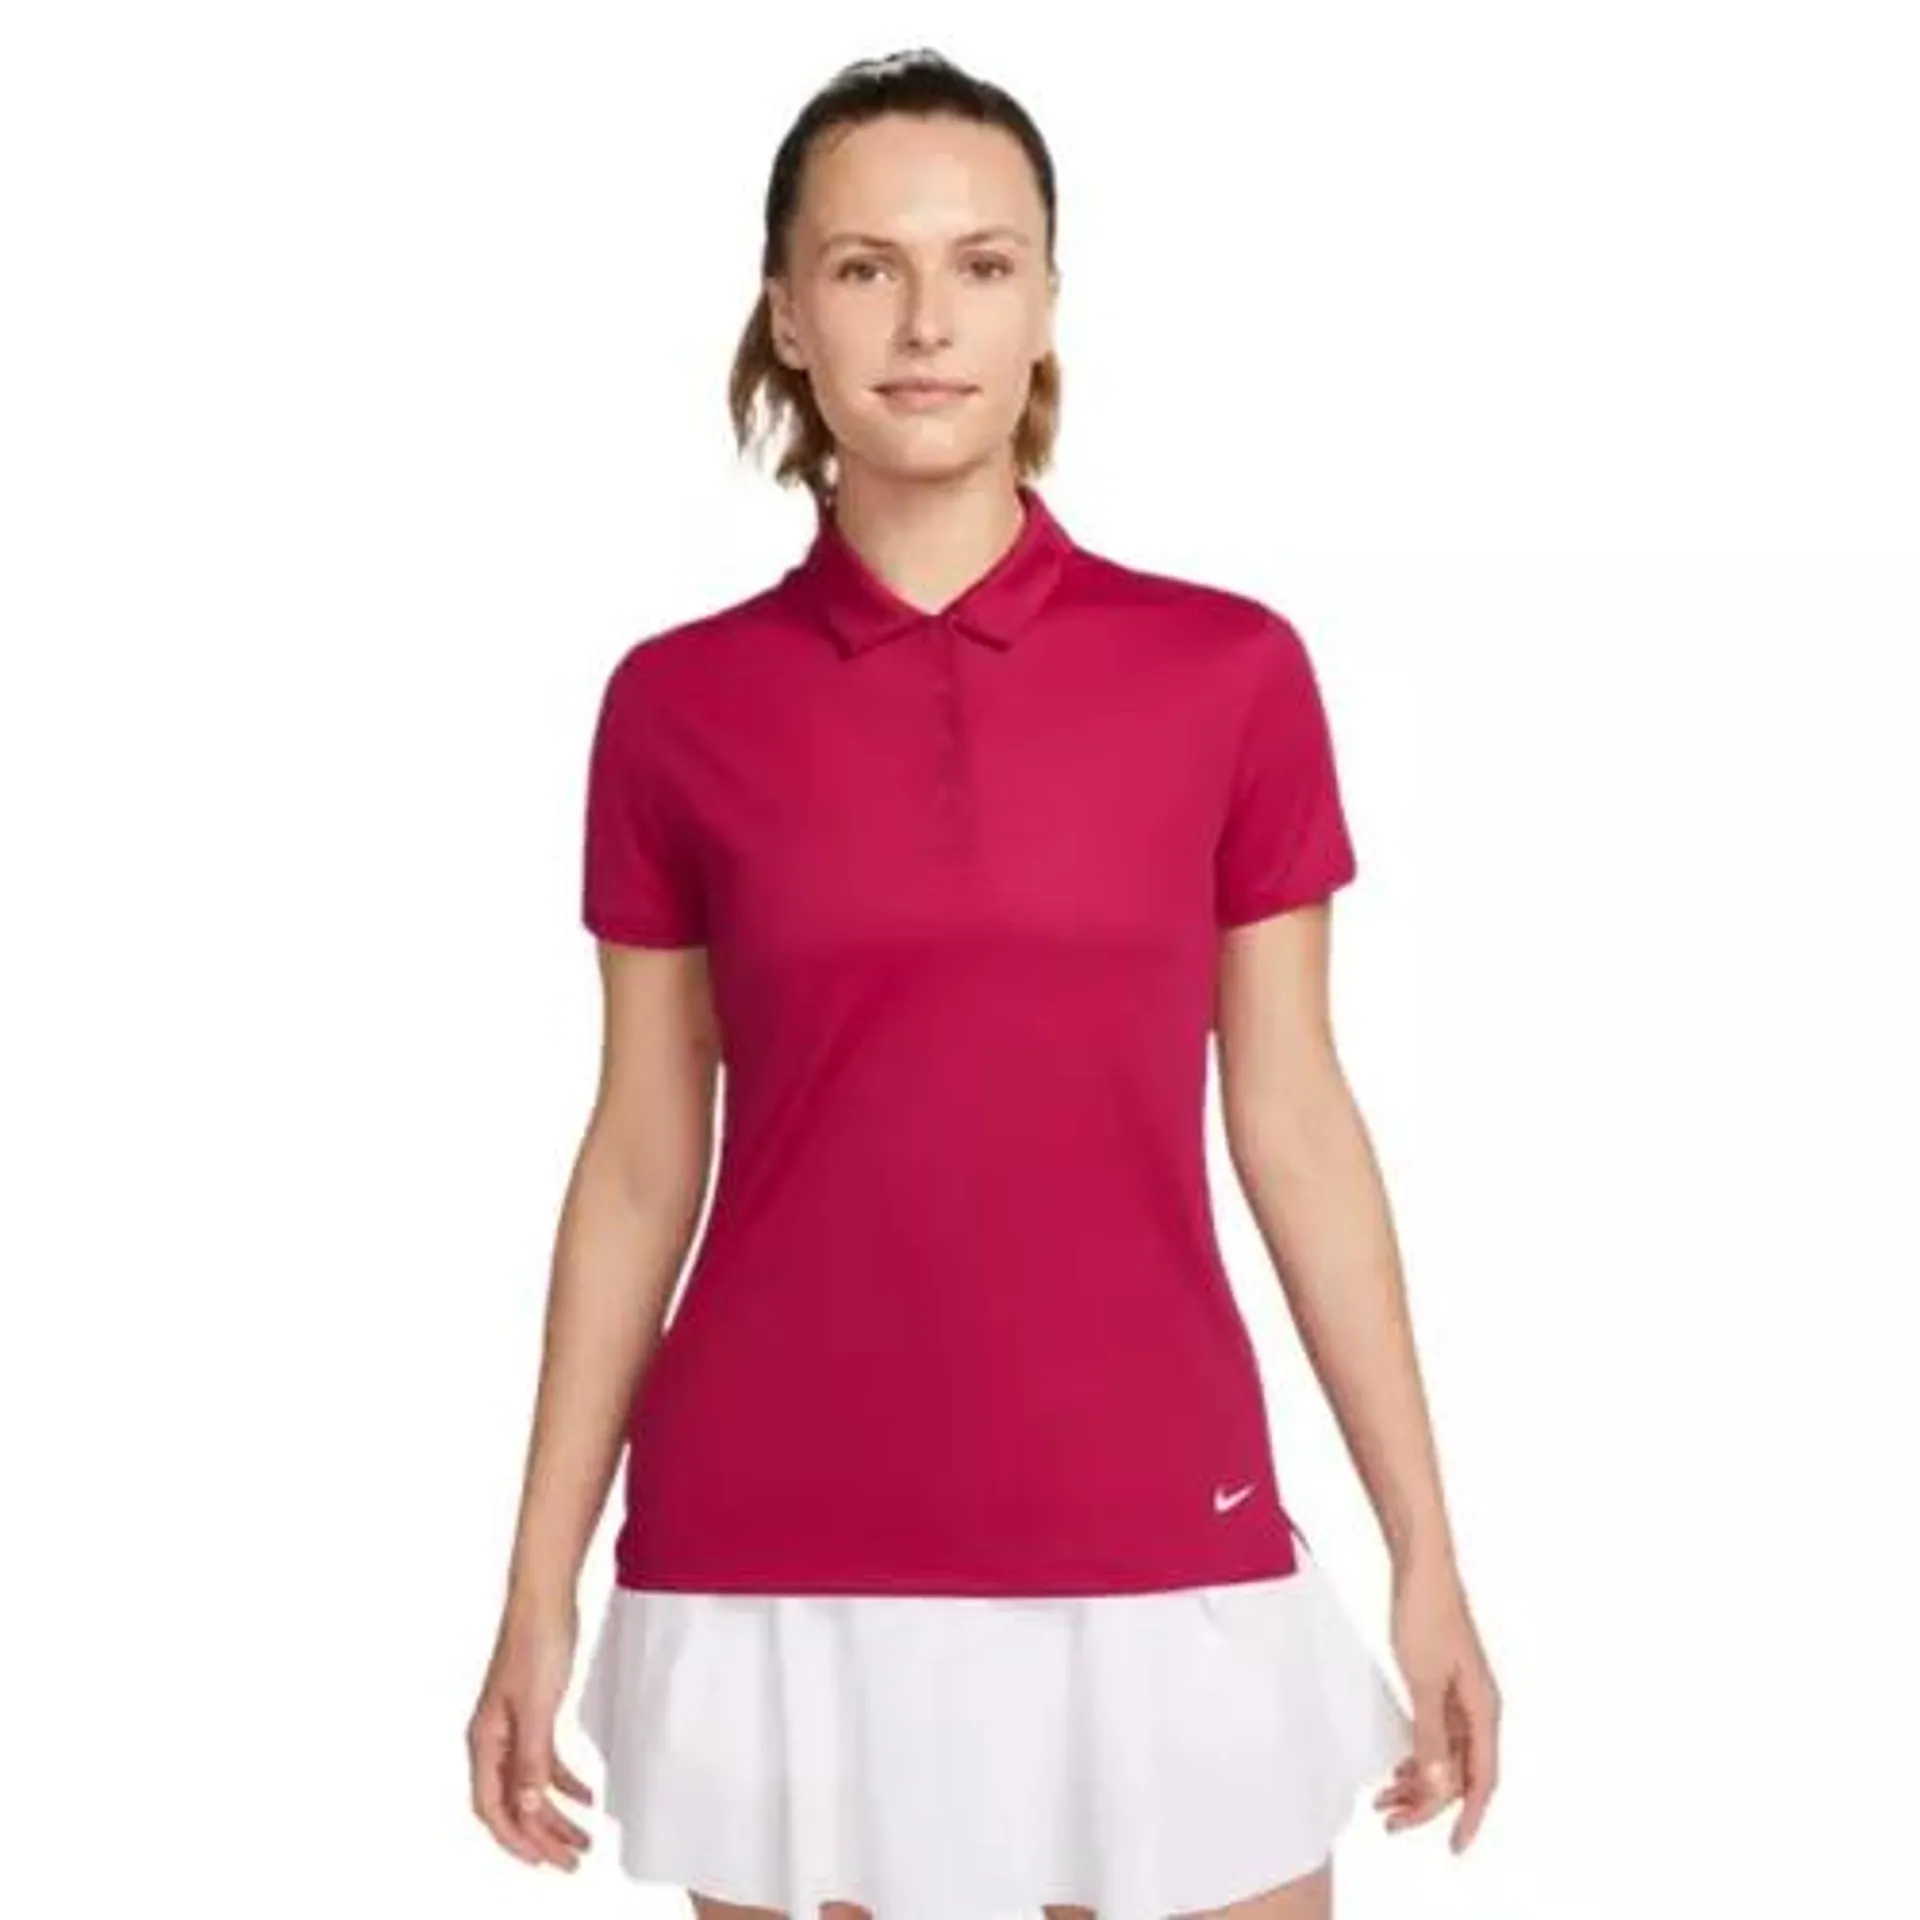 Women's Nike Dri-FIT Victory Solid Golf Polo